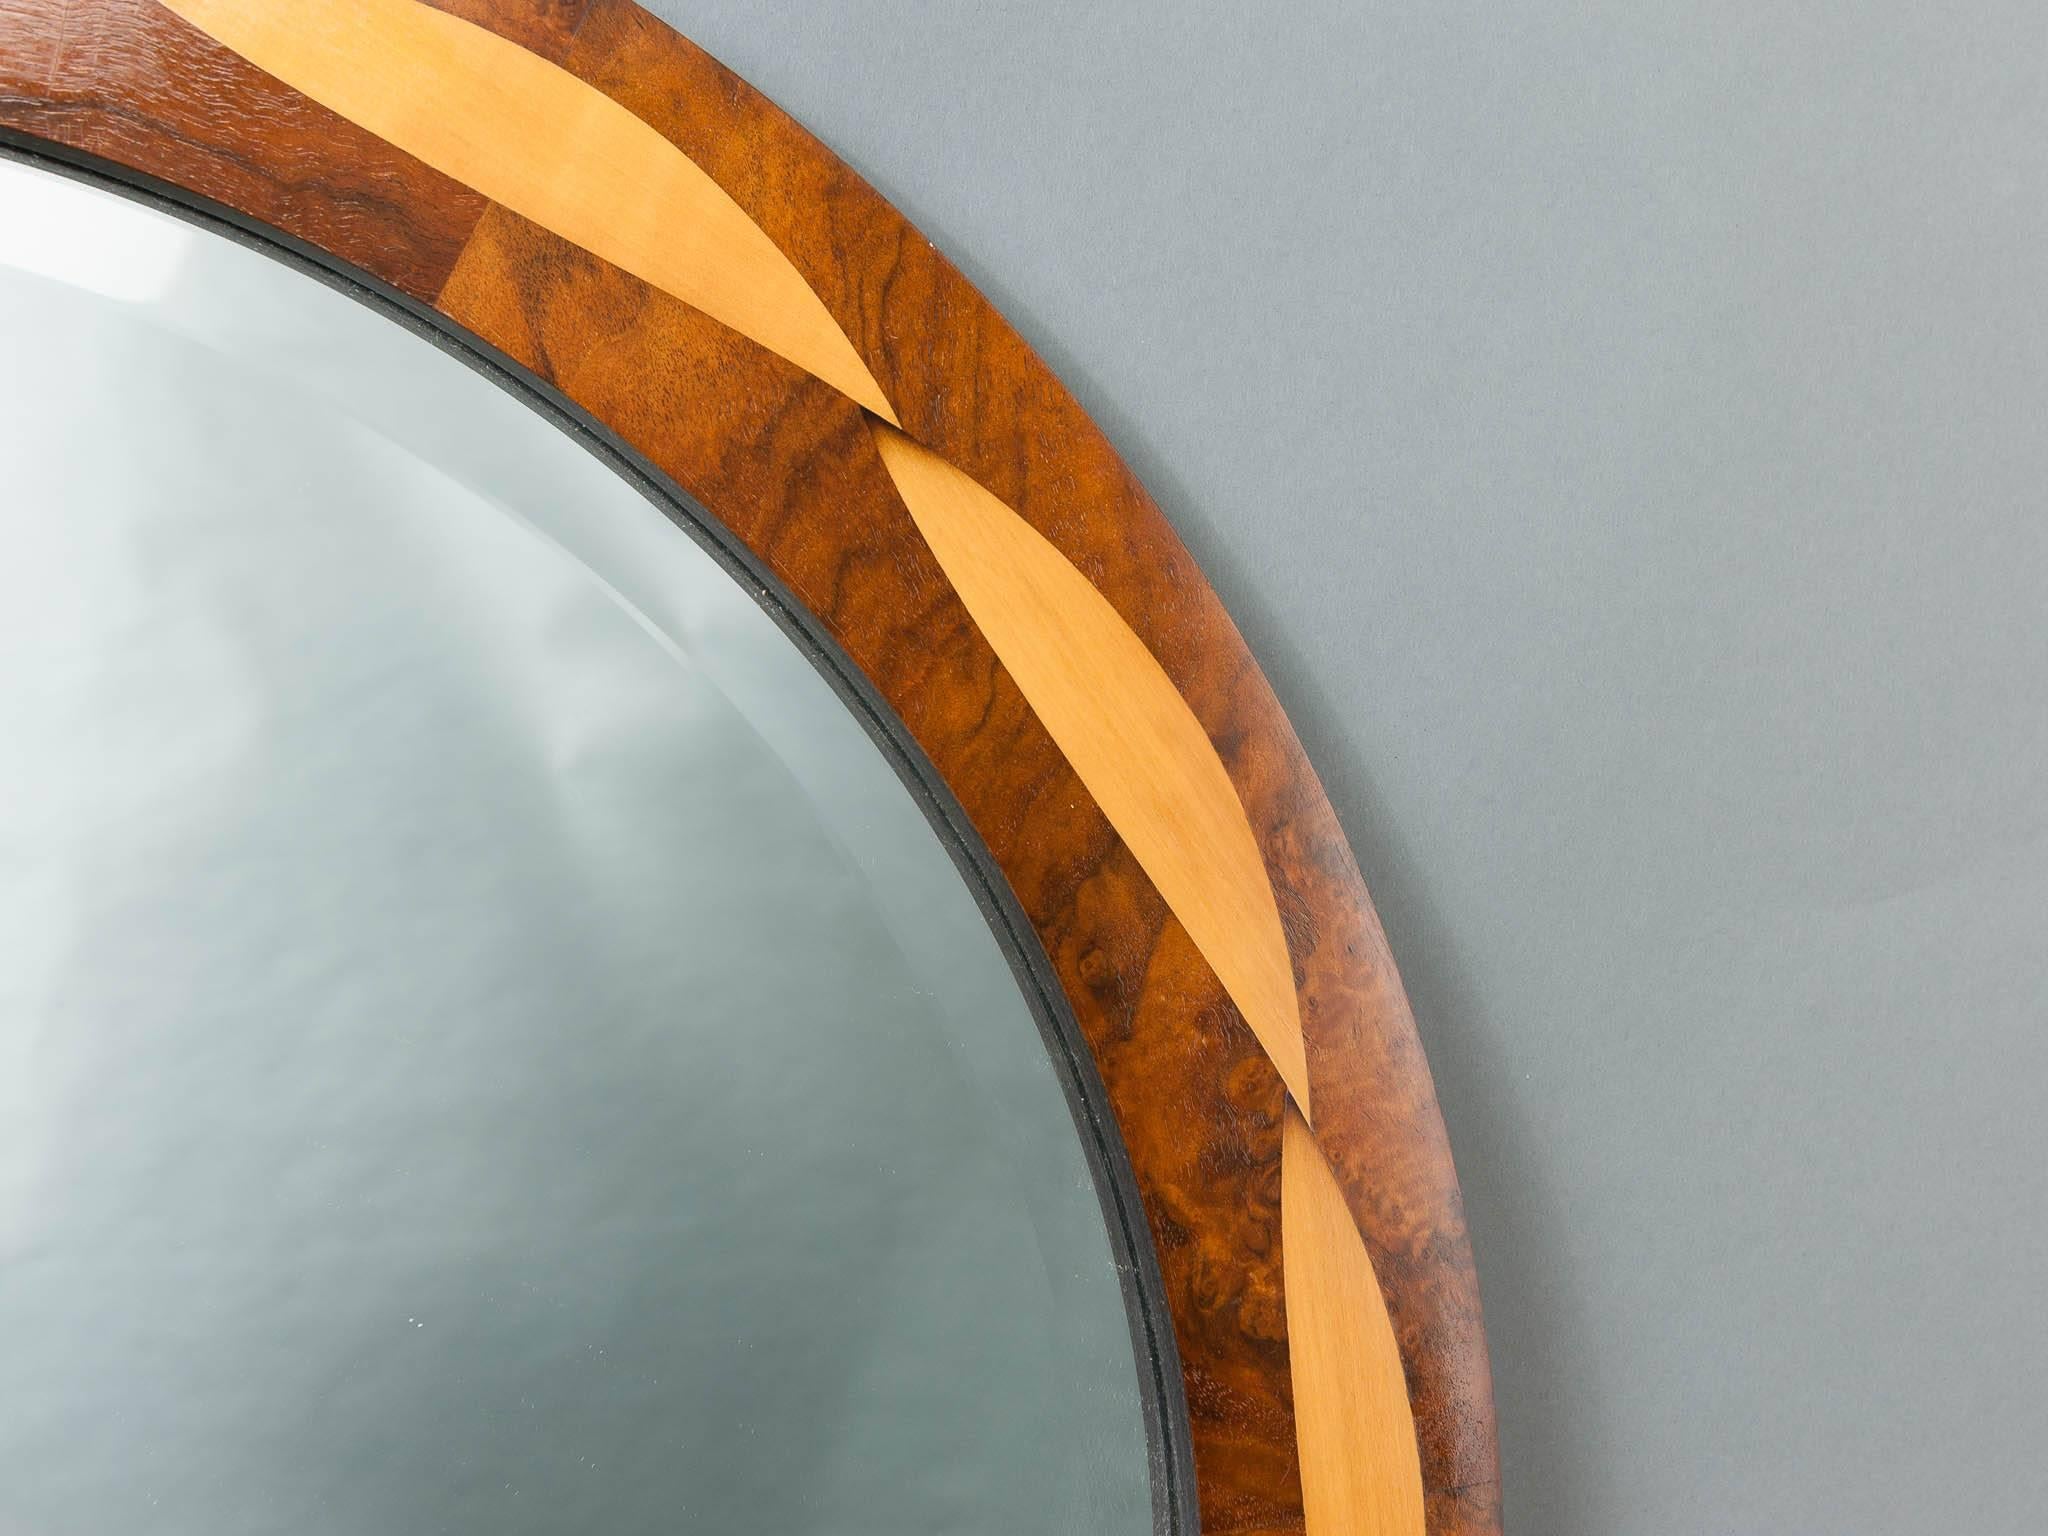 Toby Winteringham 'Plexus' round mirror with a simple yet beautiful inlaid lazy twist of sand shaded Sycamore on a contrasting background timber of Indian rosewood. Perfect for above a mantelpiece or in a hallway.

From a barn on the outskirts of